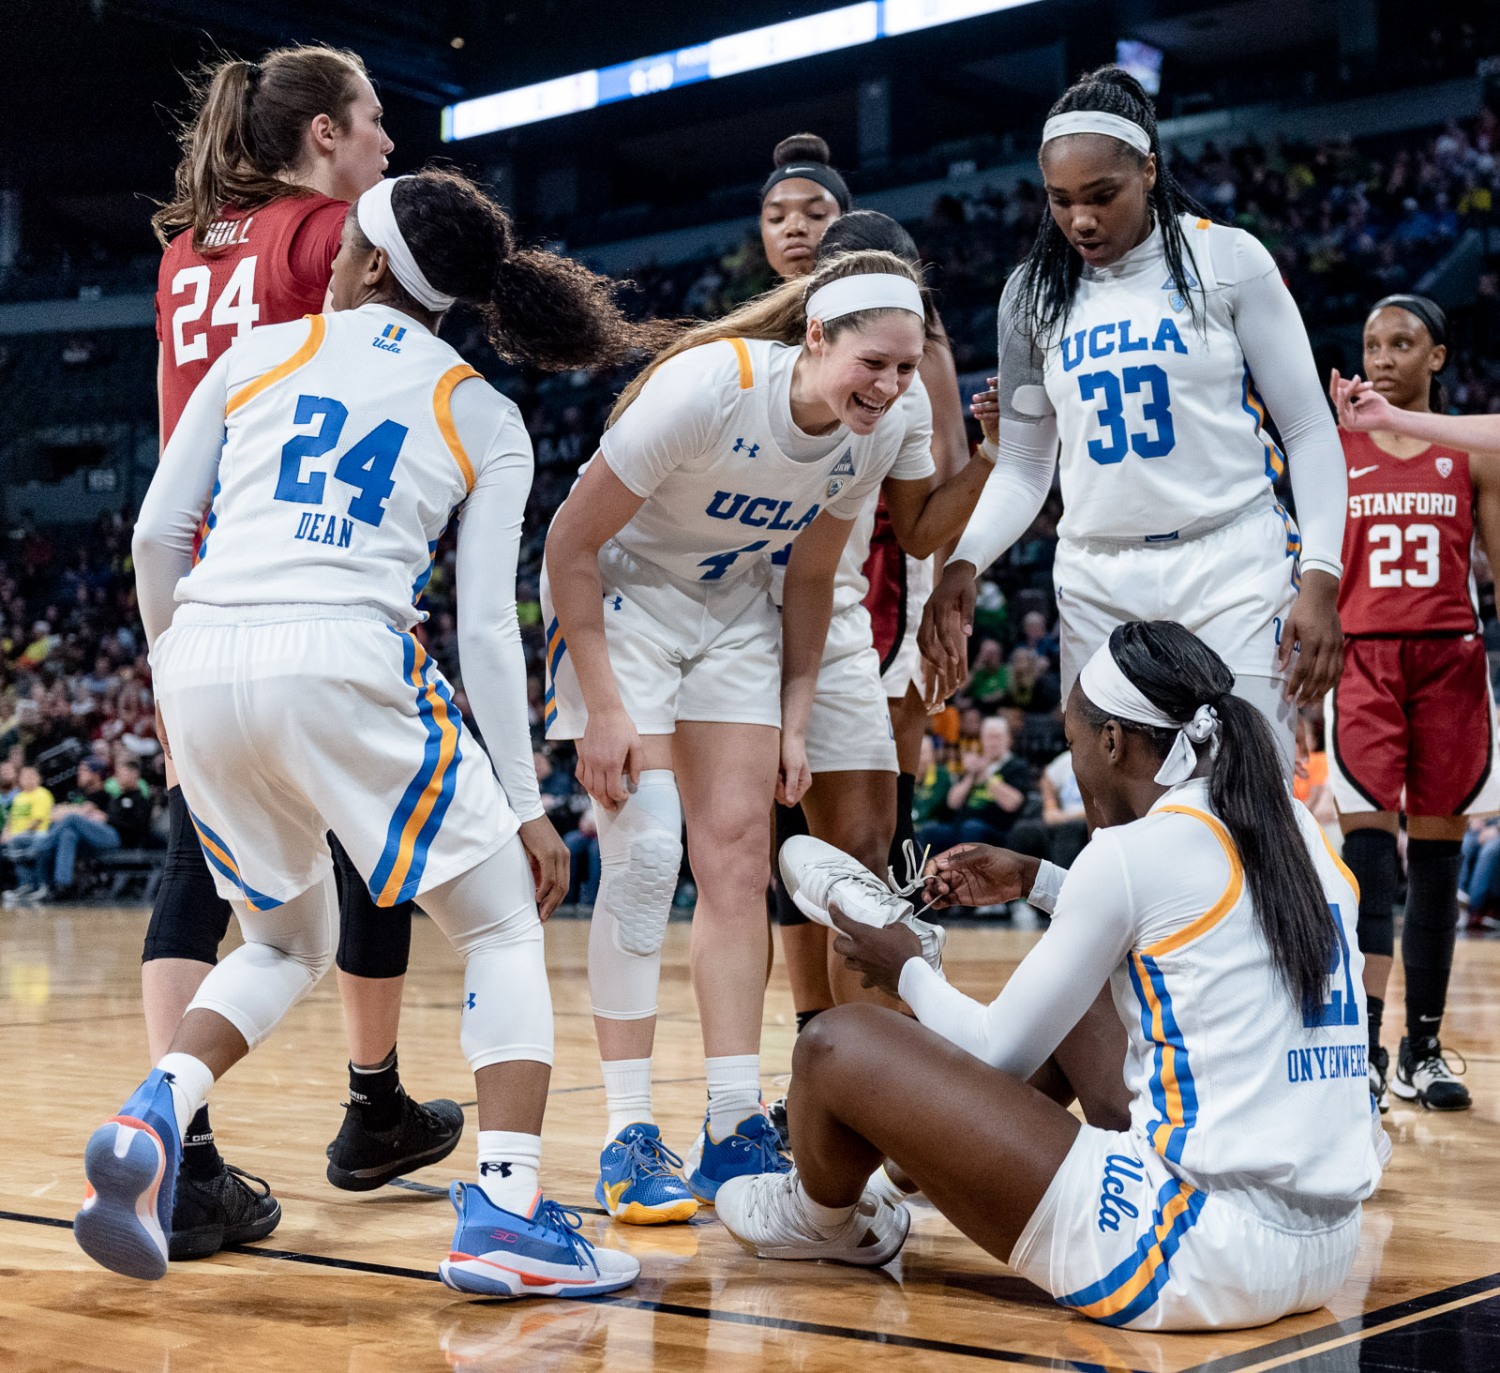 Gallery After Defeating Usc Womens Basketball Ends Pac 12 Chances At